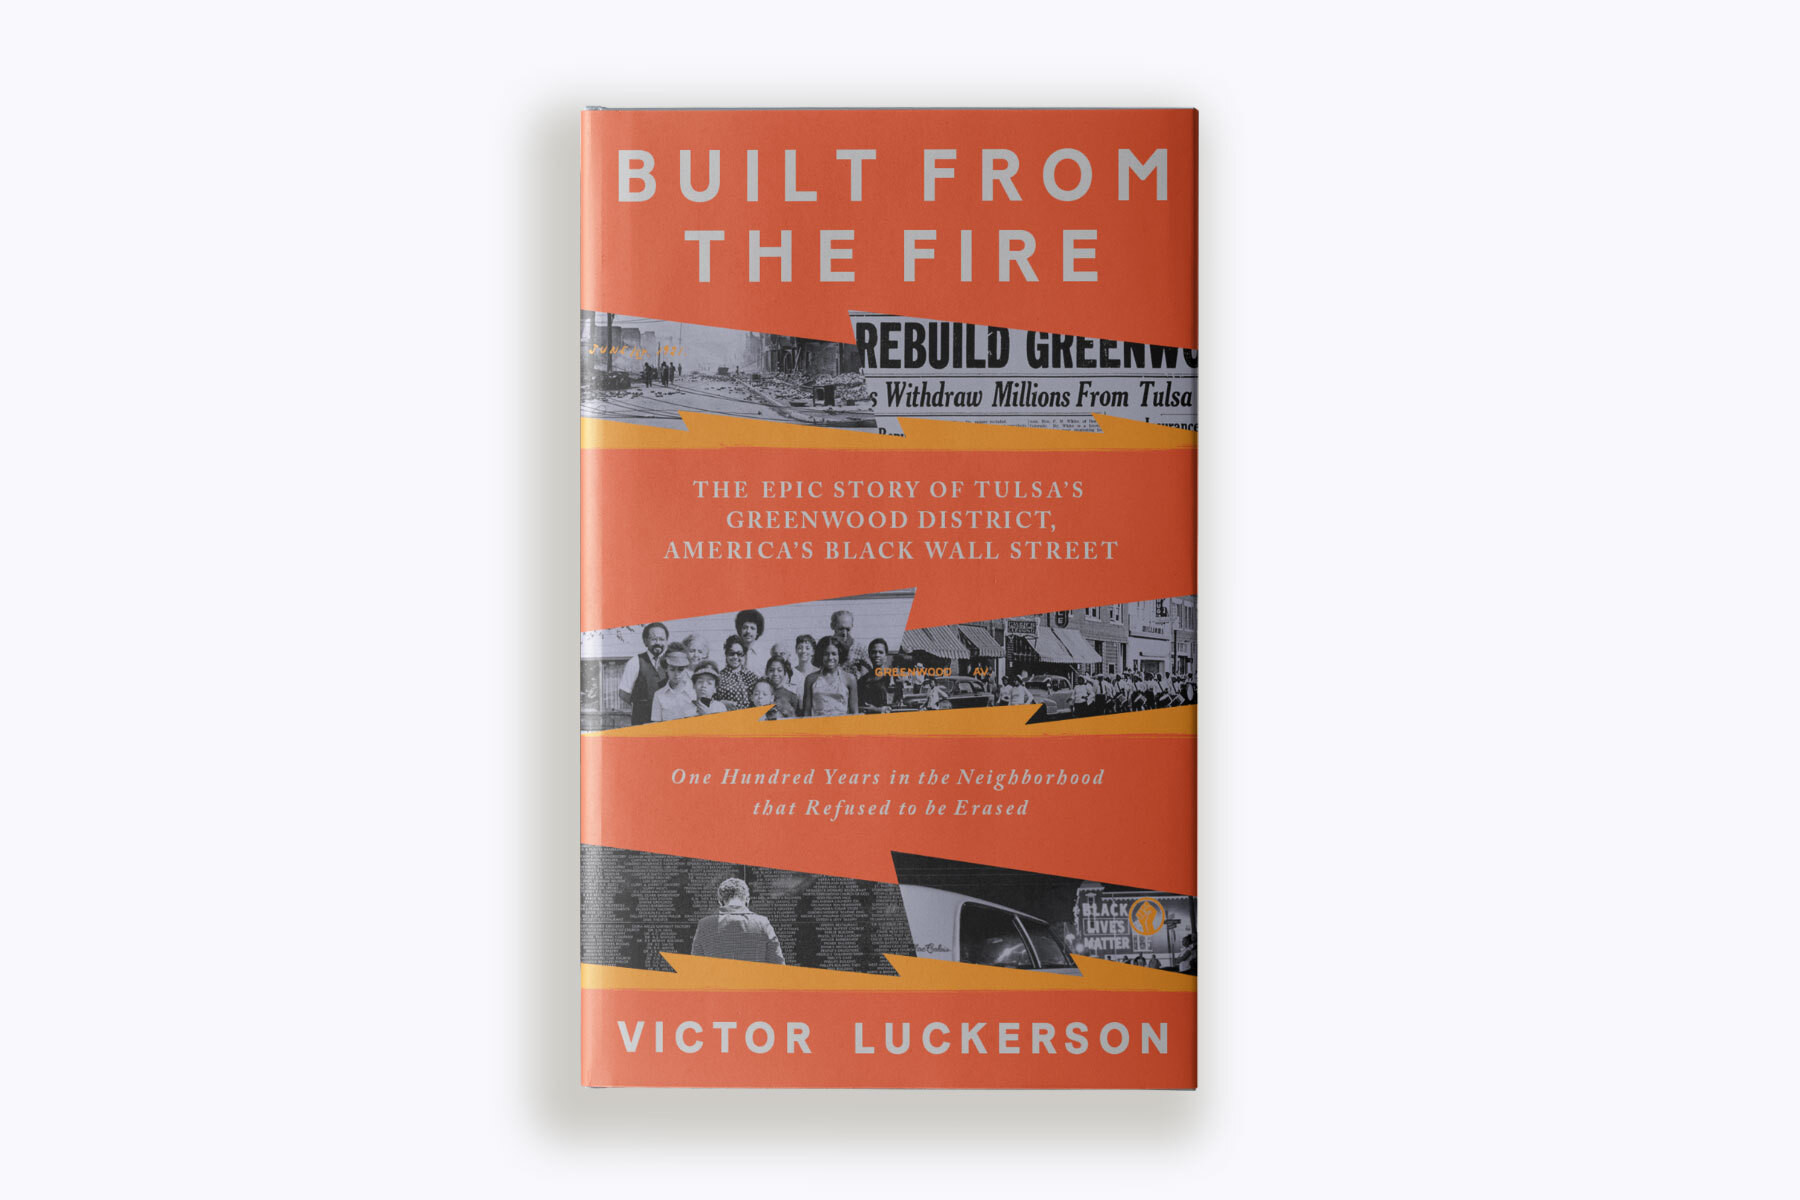 Book cover of "Built from The Fire" by Victor Luckerson on white background.